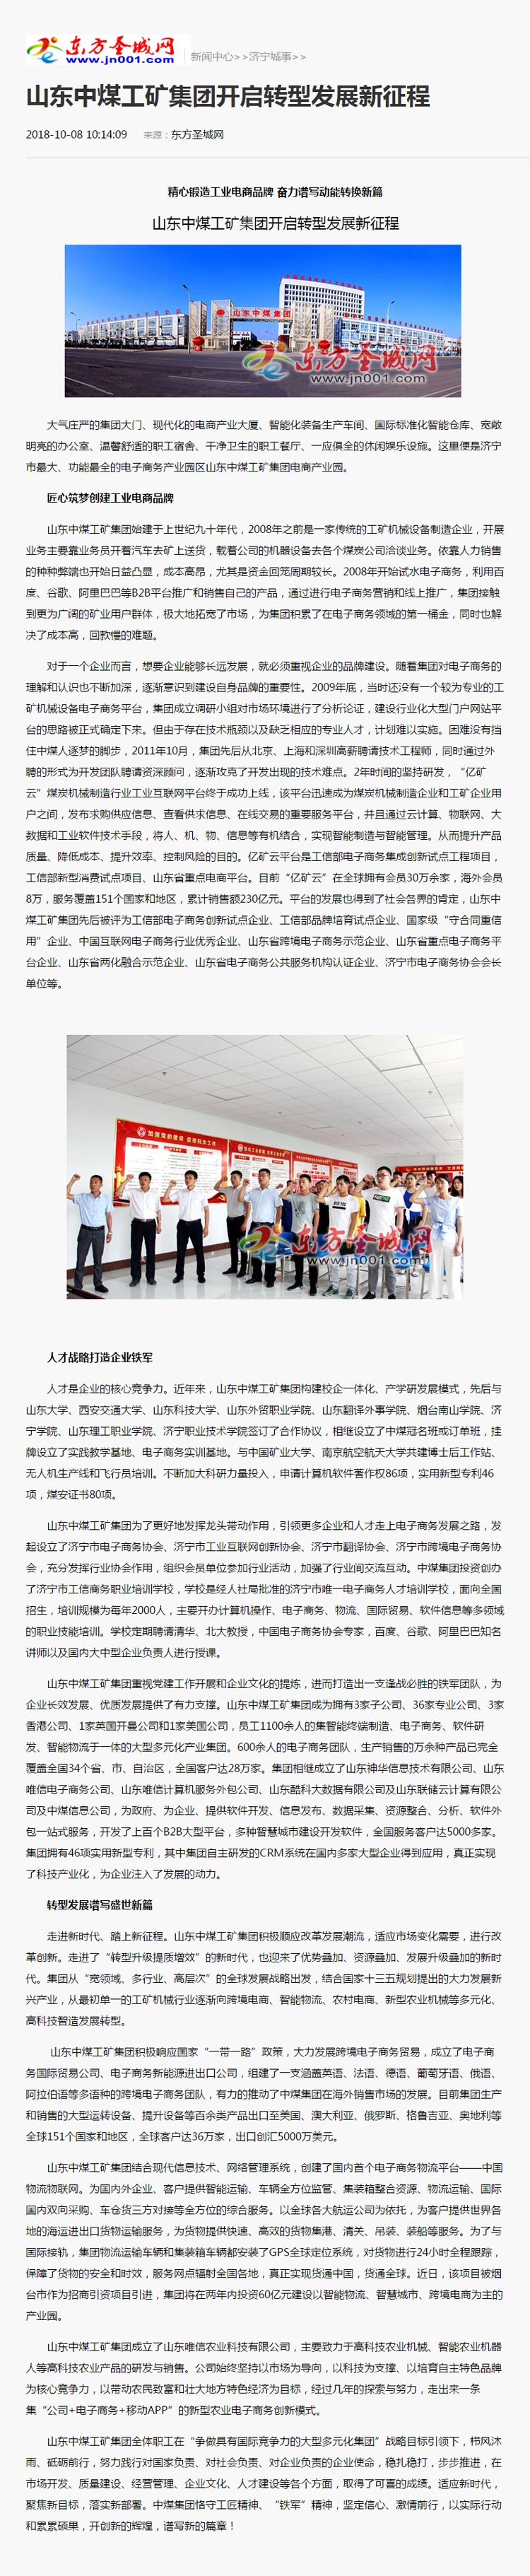 The Innovation And Transformation Development Achievements Of China Coal Group Were Reported By The Oriental Holy City Network